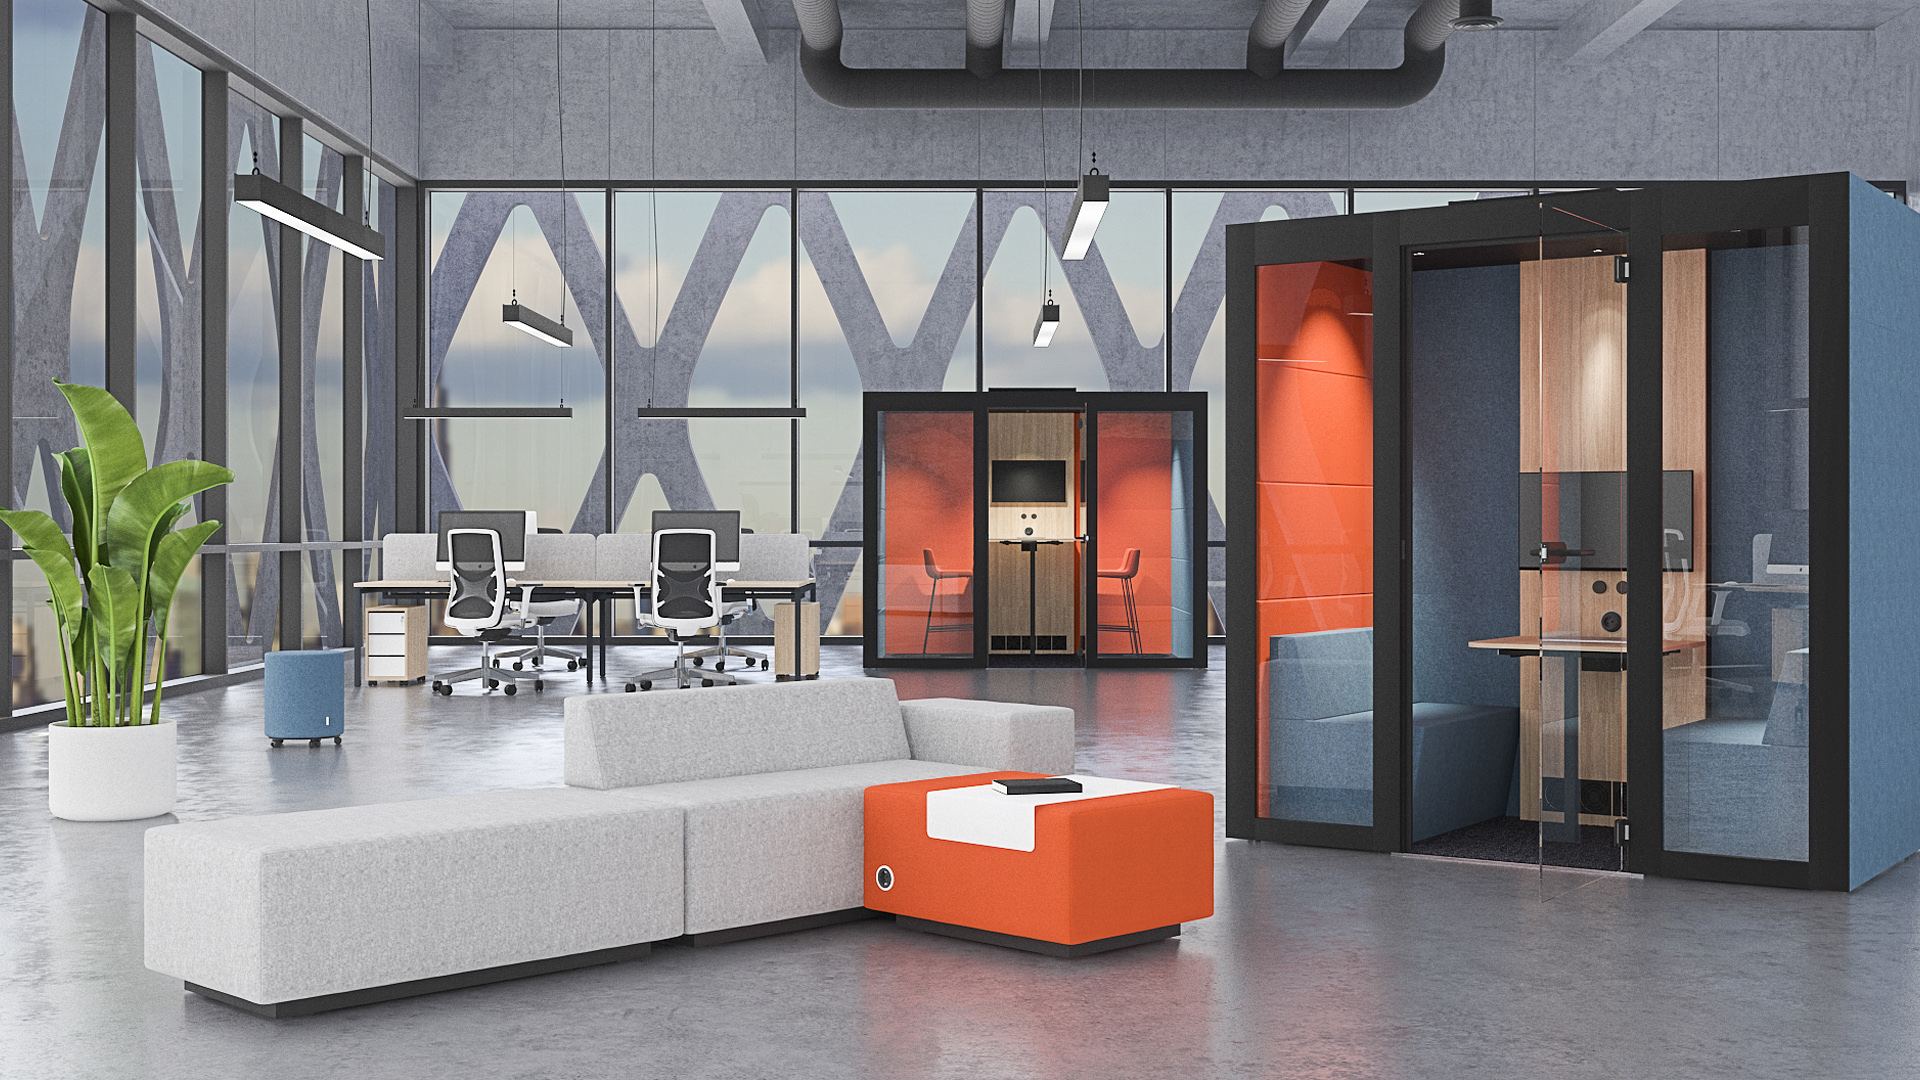 Combine the medium and large Silent Room to create breakout areas of different sizes